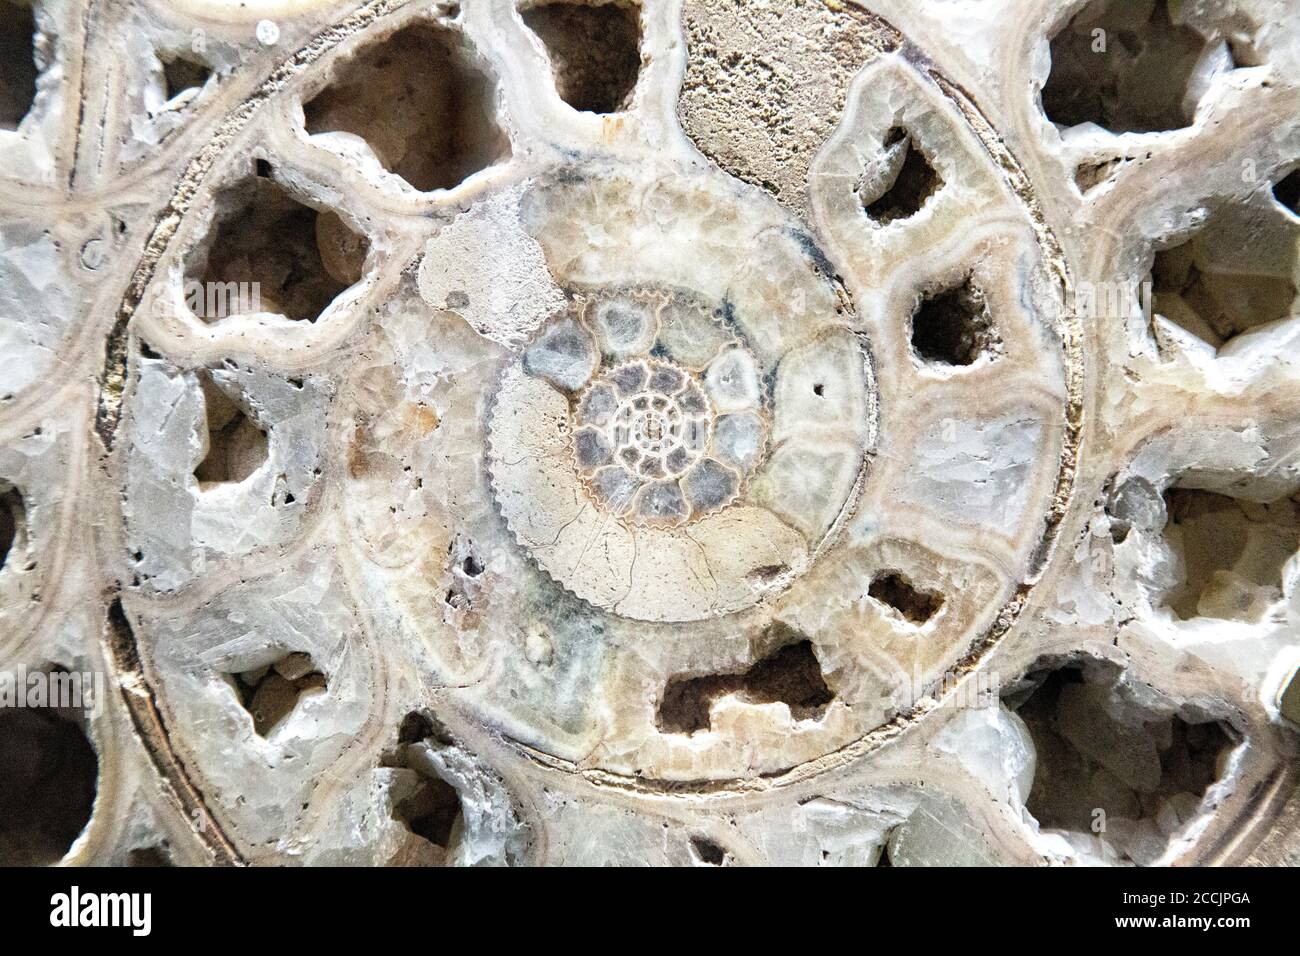 Close-up of an ammonite fossil (Horniman Museum, London, UK) Stock Photo